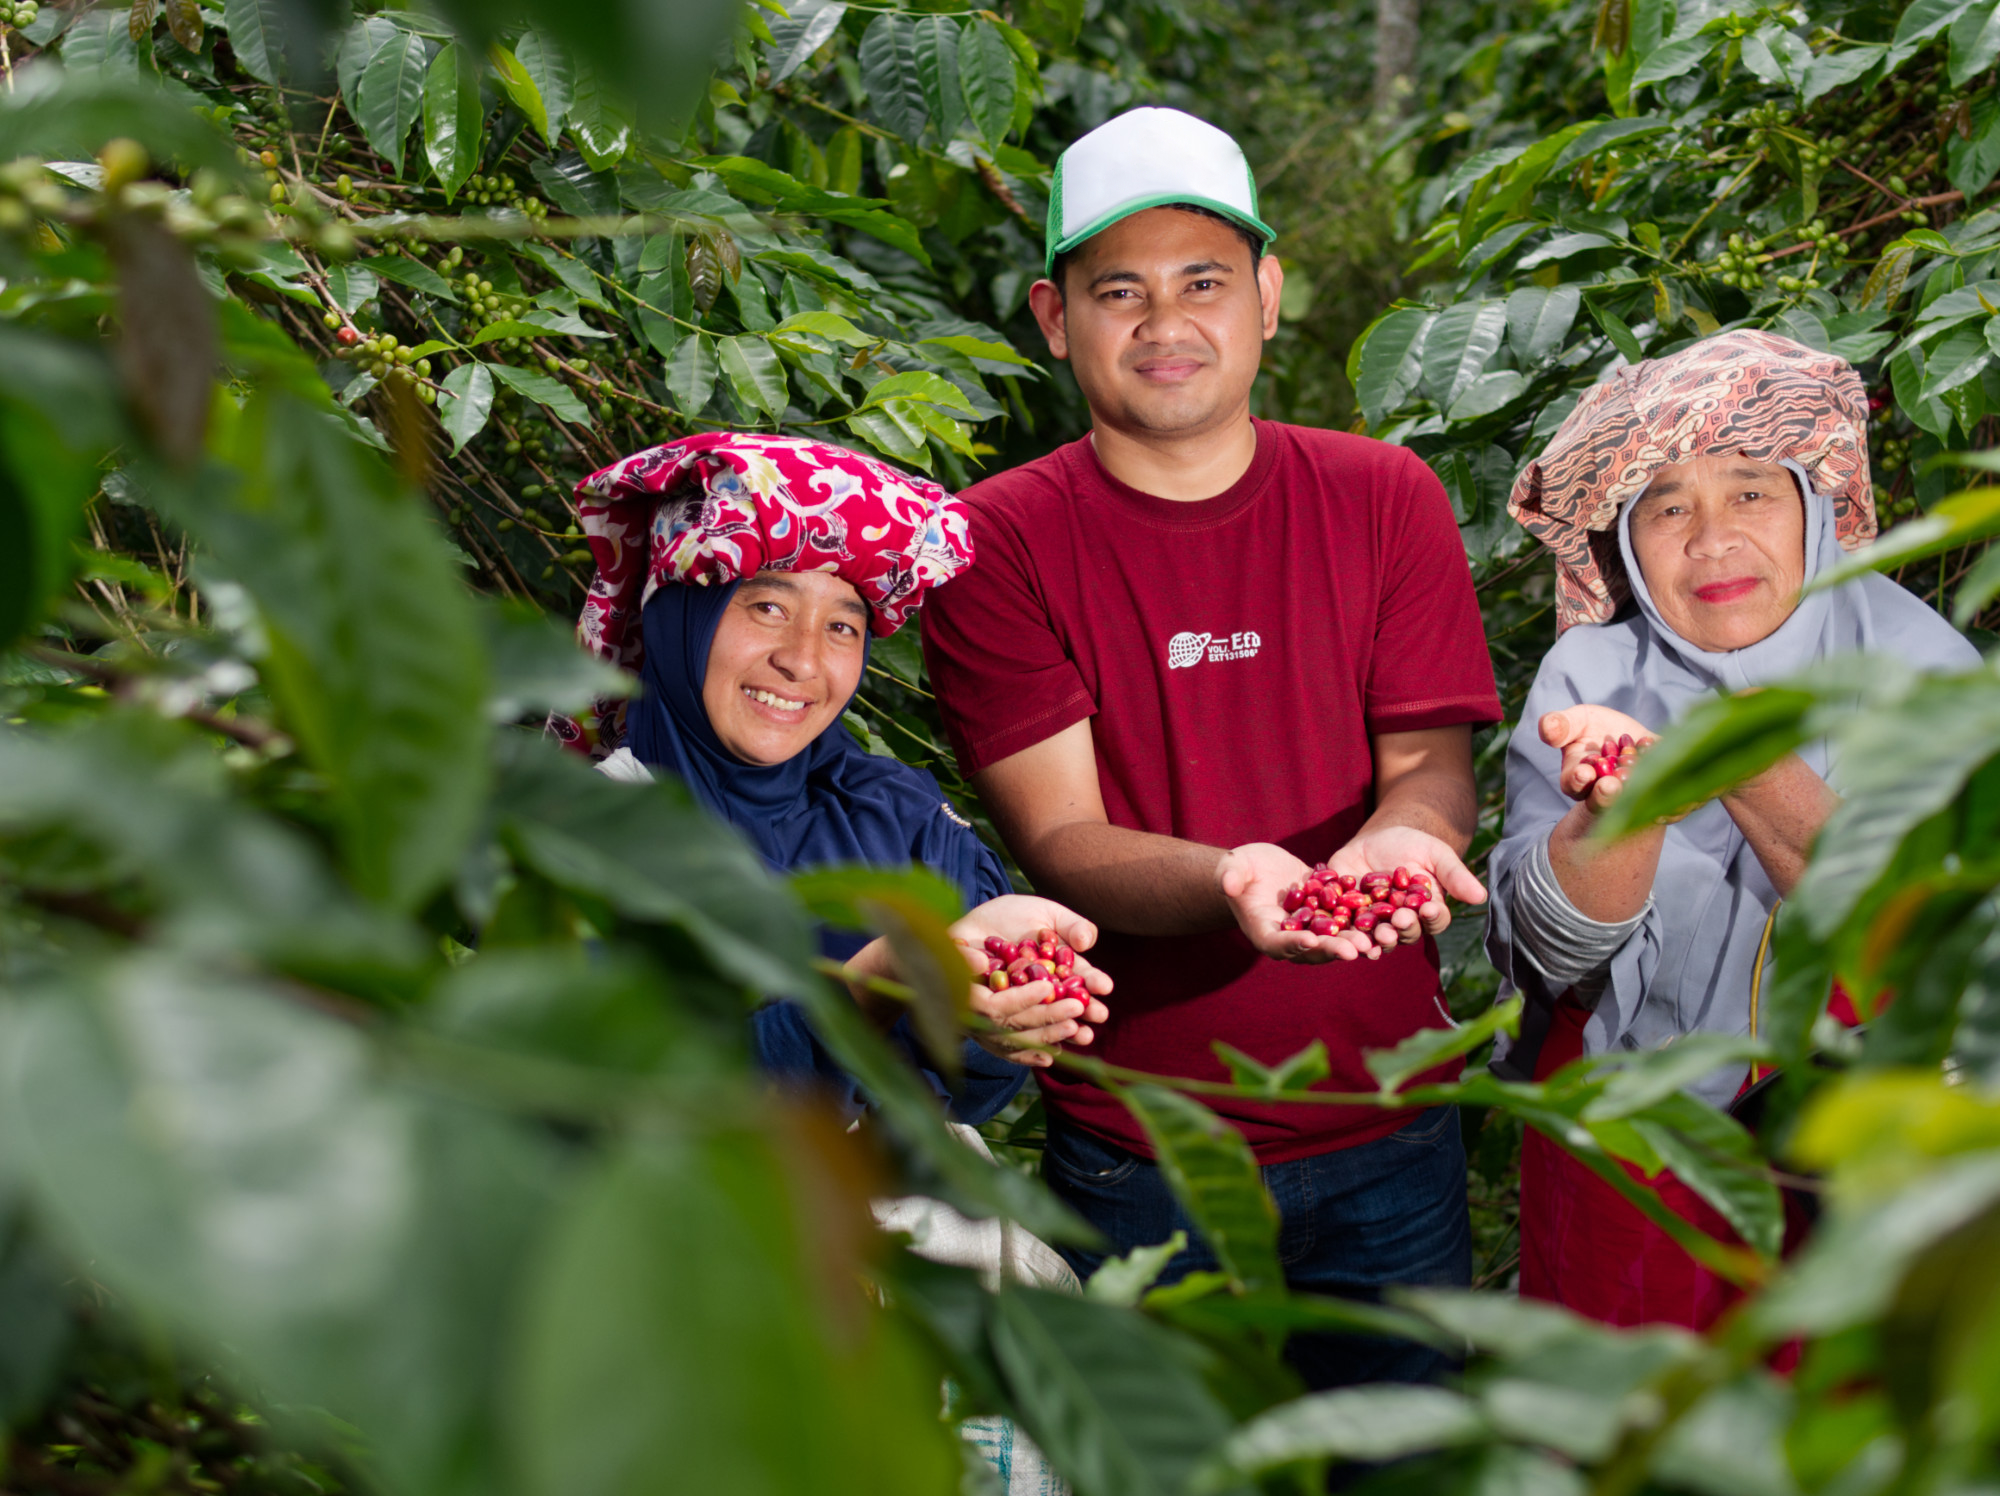 05. Coffee is one out of seven agricultural commodities that contribute to deforestation